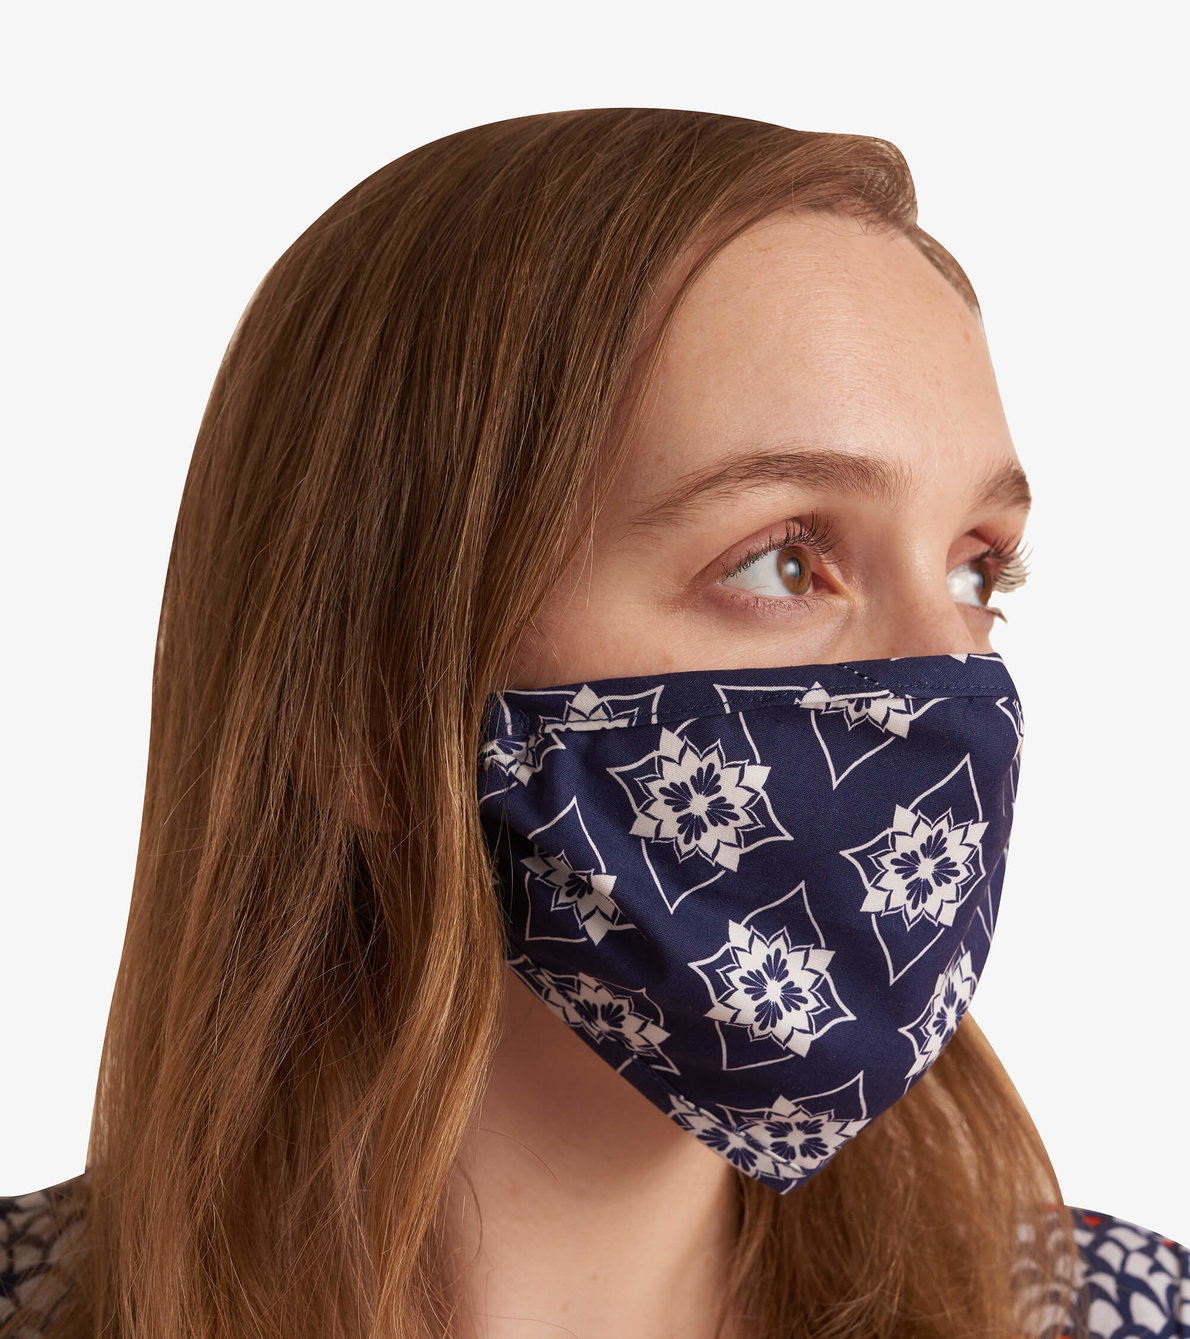 View larger image of Non-Medical Reusable Adult Face Mask - Geometric Flowers